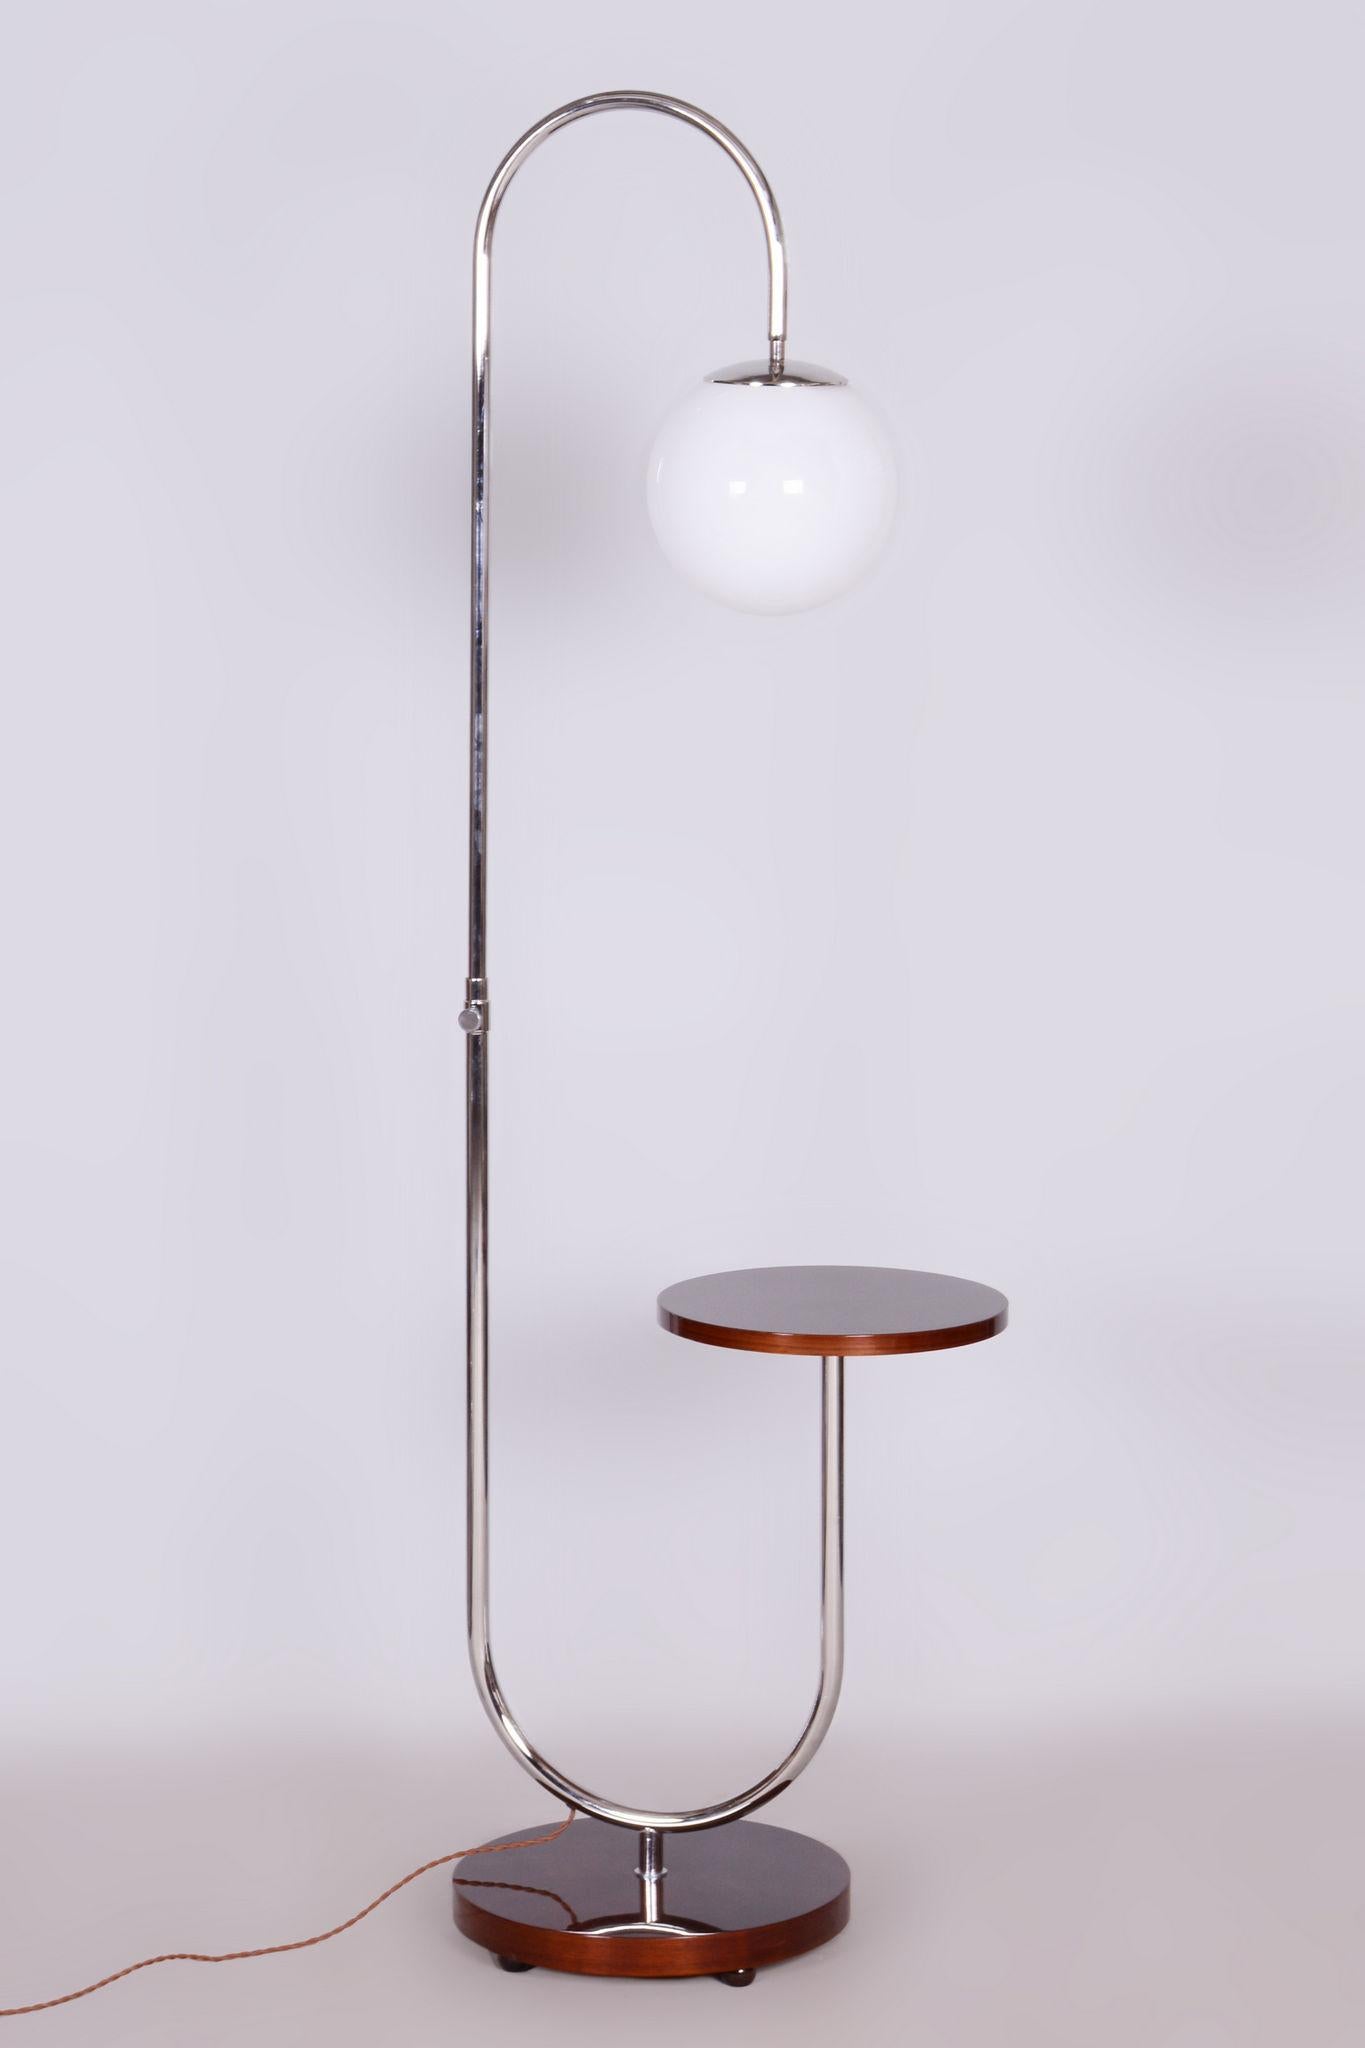 Restored Bauhaus Floor Lamp with High Gloss.

Material: Walnut, Chrome-plated Steel, Milk Glass
Source: Czechia (Czechoslovakia)
Period: 1930-1939

The wood is veneered with walnut root veneer.
Luxurious finish to a high gloss.
The diameter of the